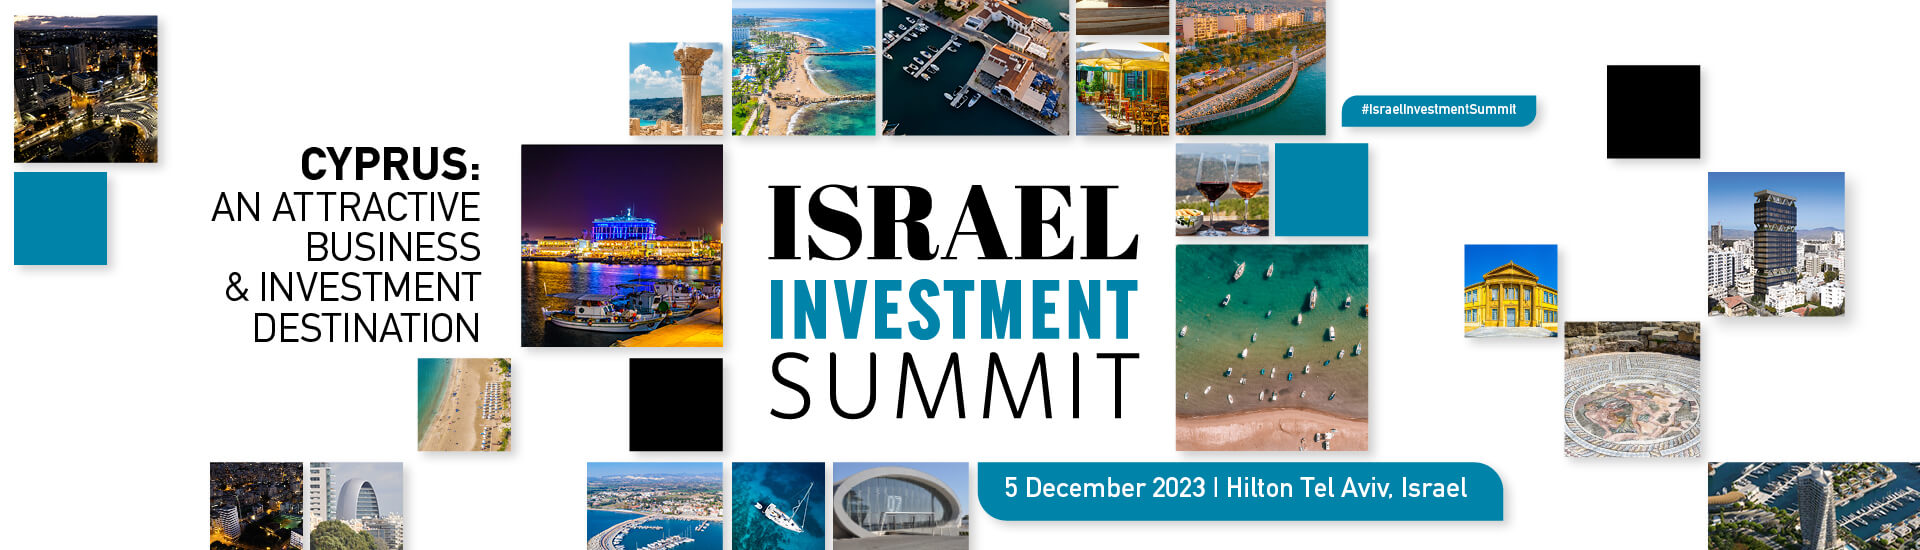 Cyprus: An attractive business and investment destination summit